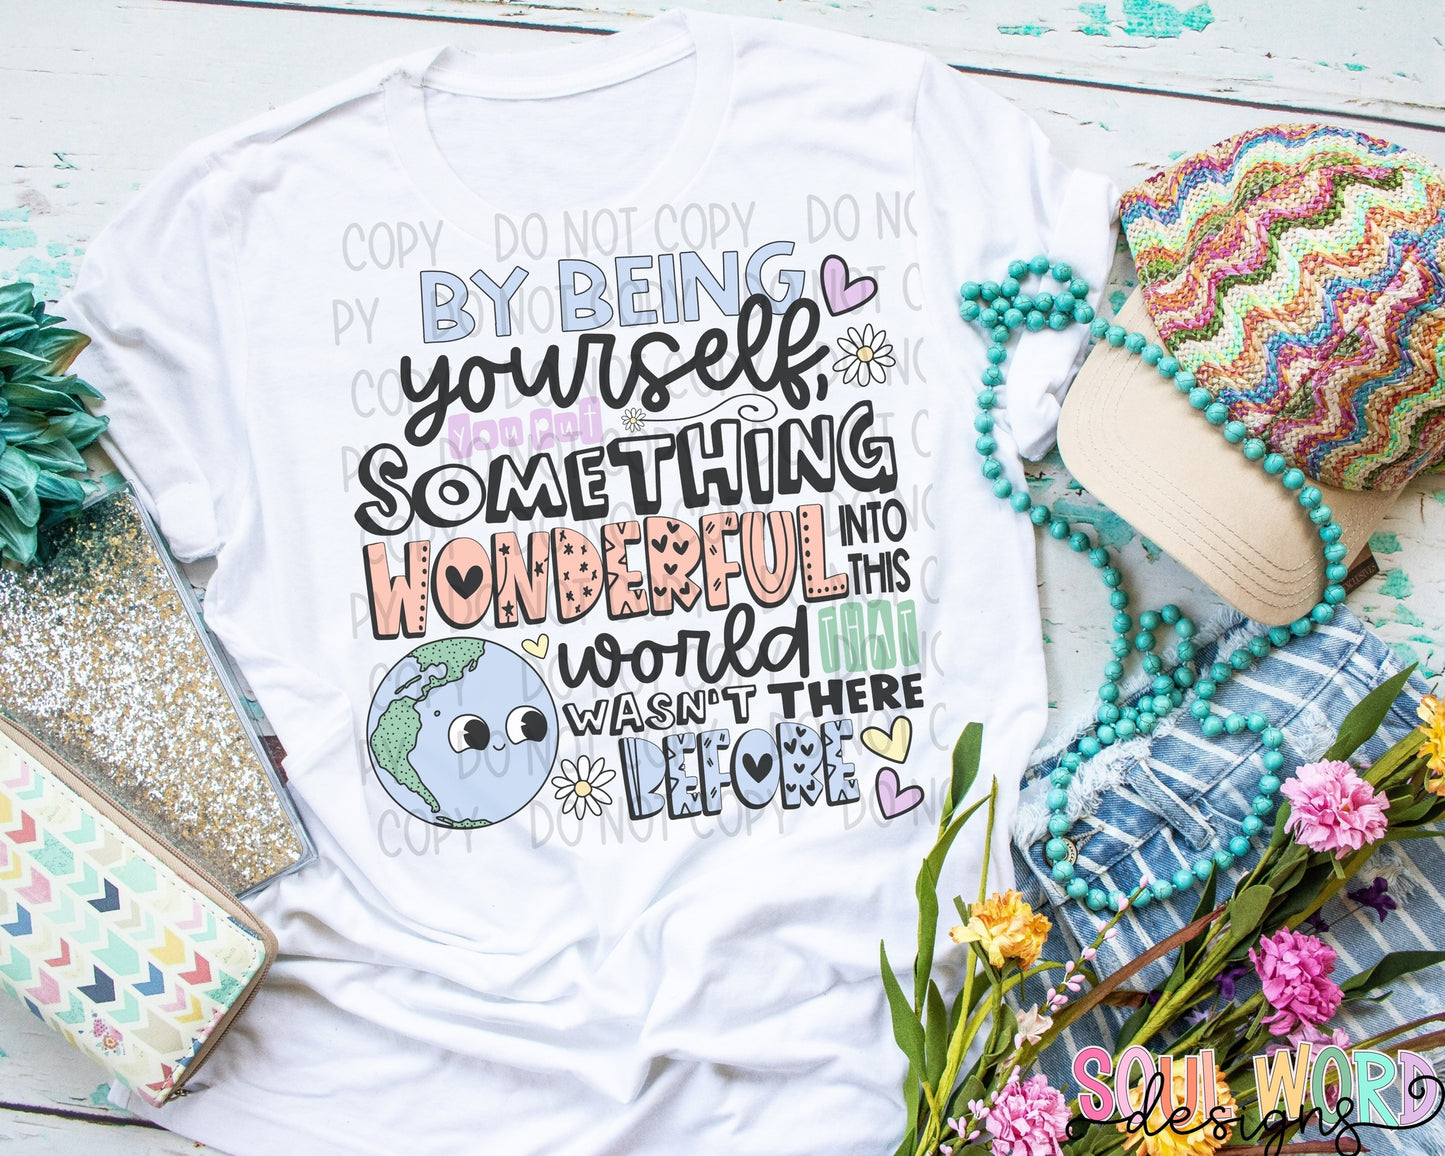 BY BEING YOURSELF YOU PUT SOMETHING WONDERFUL INTO THIS WORLD THAT WASN'T THERE BEFORE T-SHIRT TANK OR SWEATSHIRT